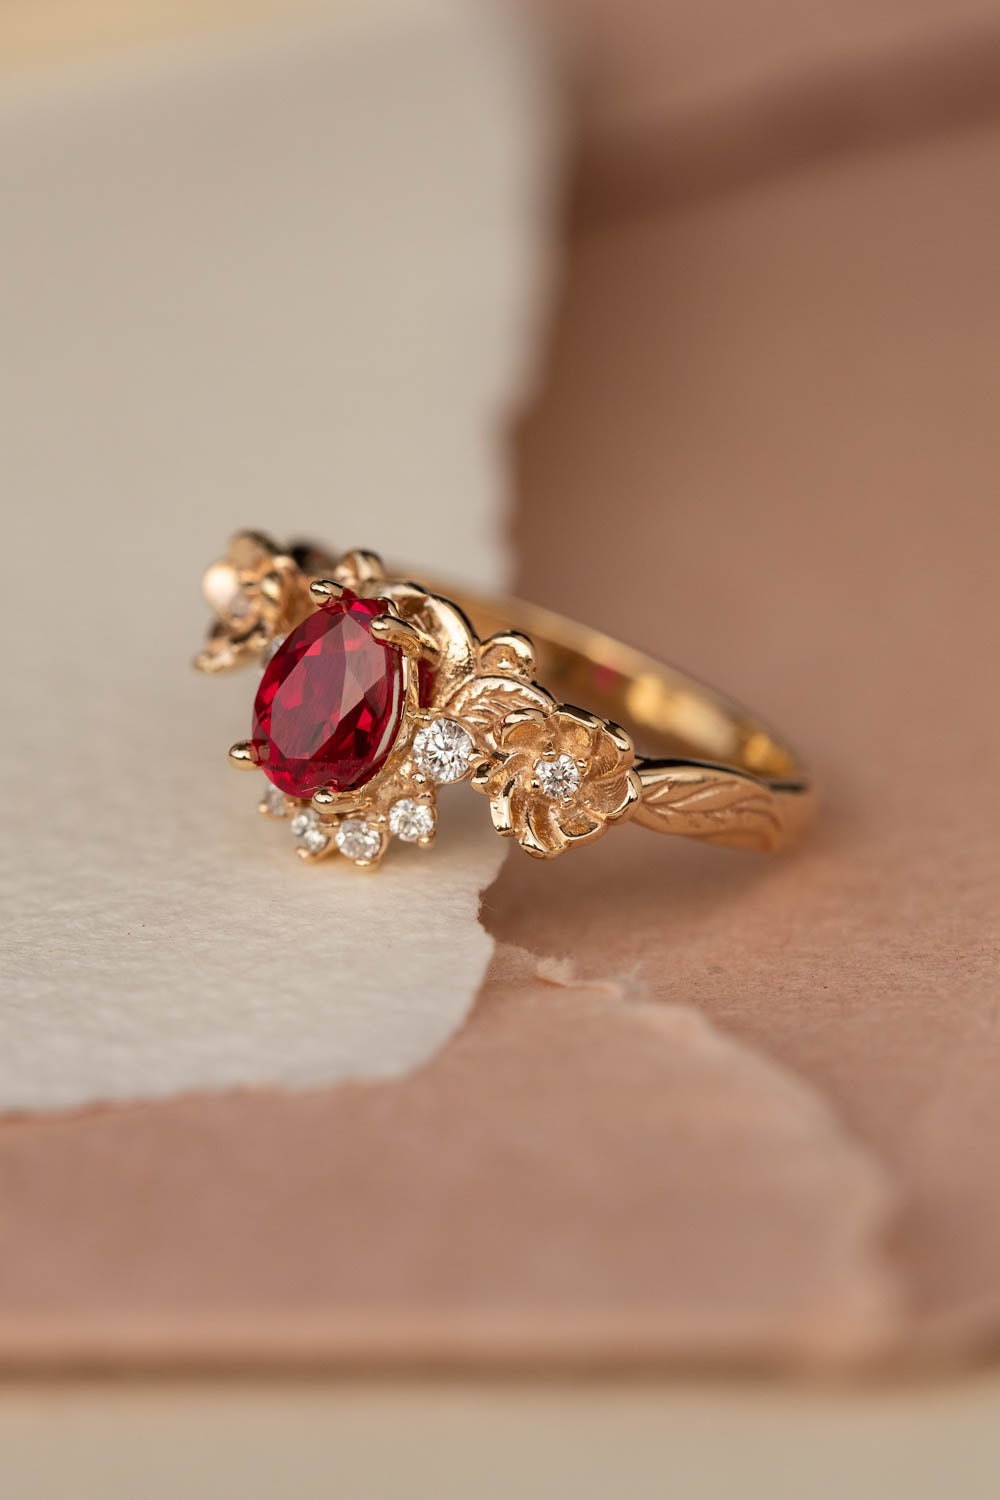 Lab ruby bridal ring set with diamond crown, unique flower engagement ring set / Adelina - Eden Garden Jewelry™